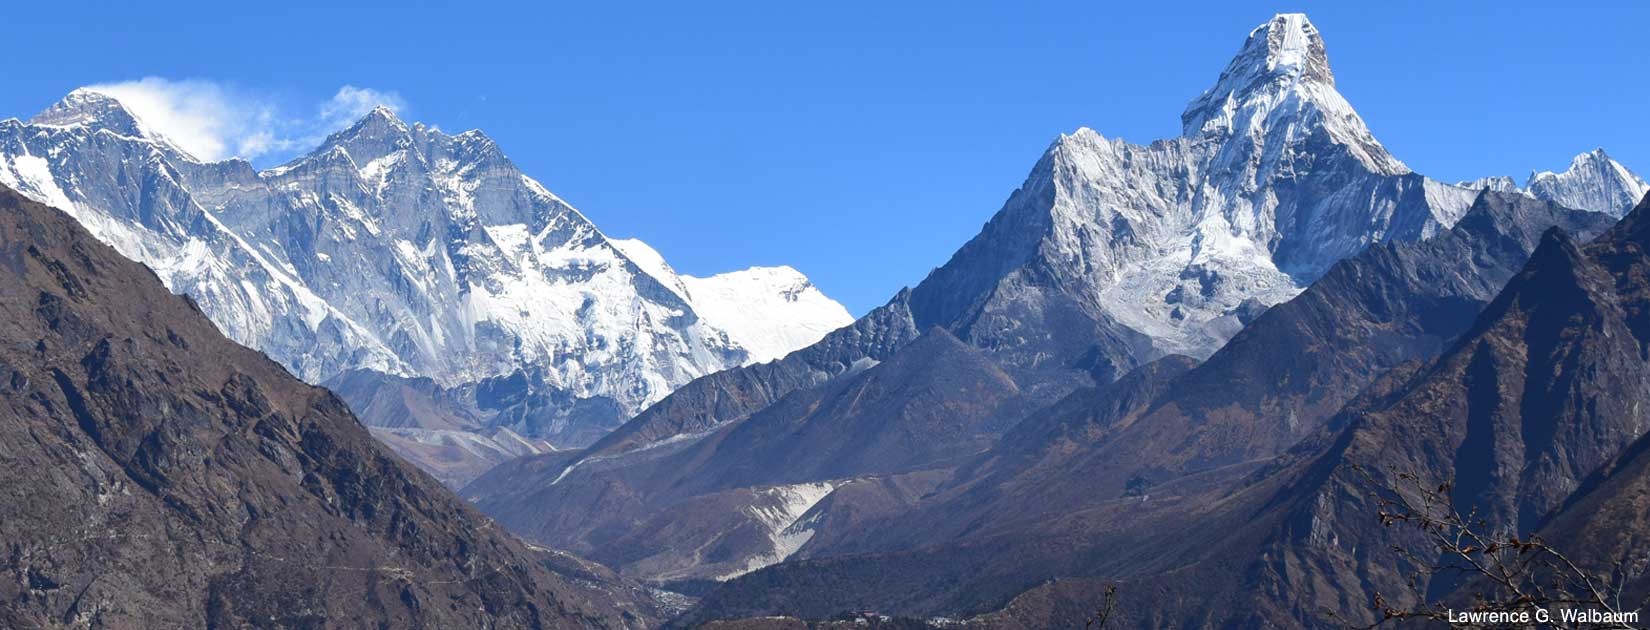 View of Mt Everest and Amadablam from Namche bazar